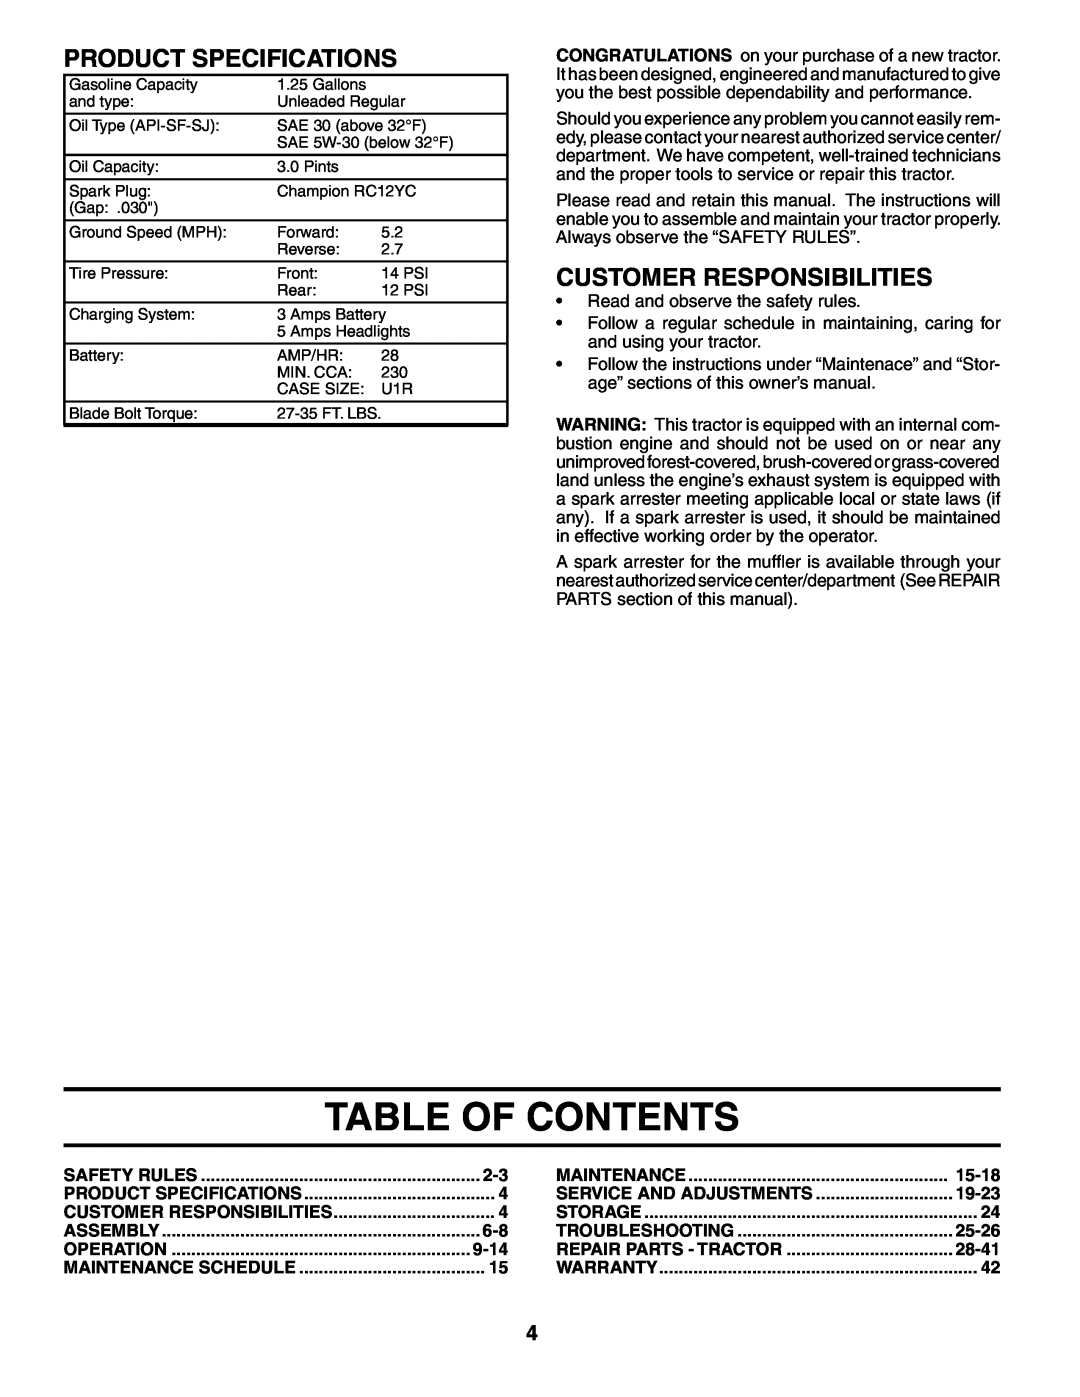 Poulan 191984 manual Table Of Contents, Product Specifications, Customer Responsibilities 